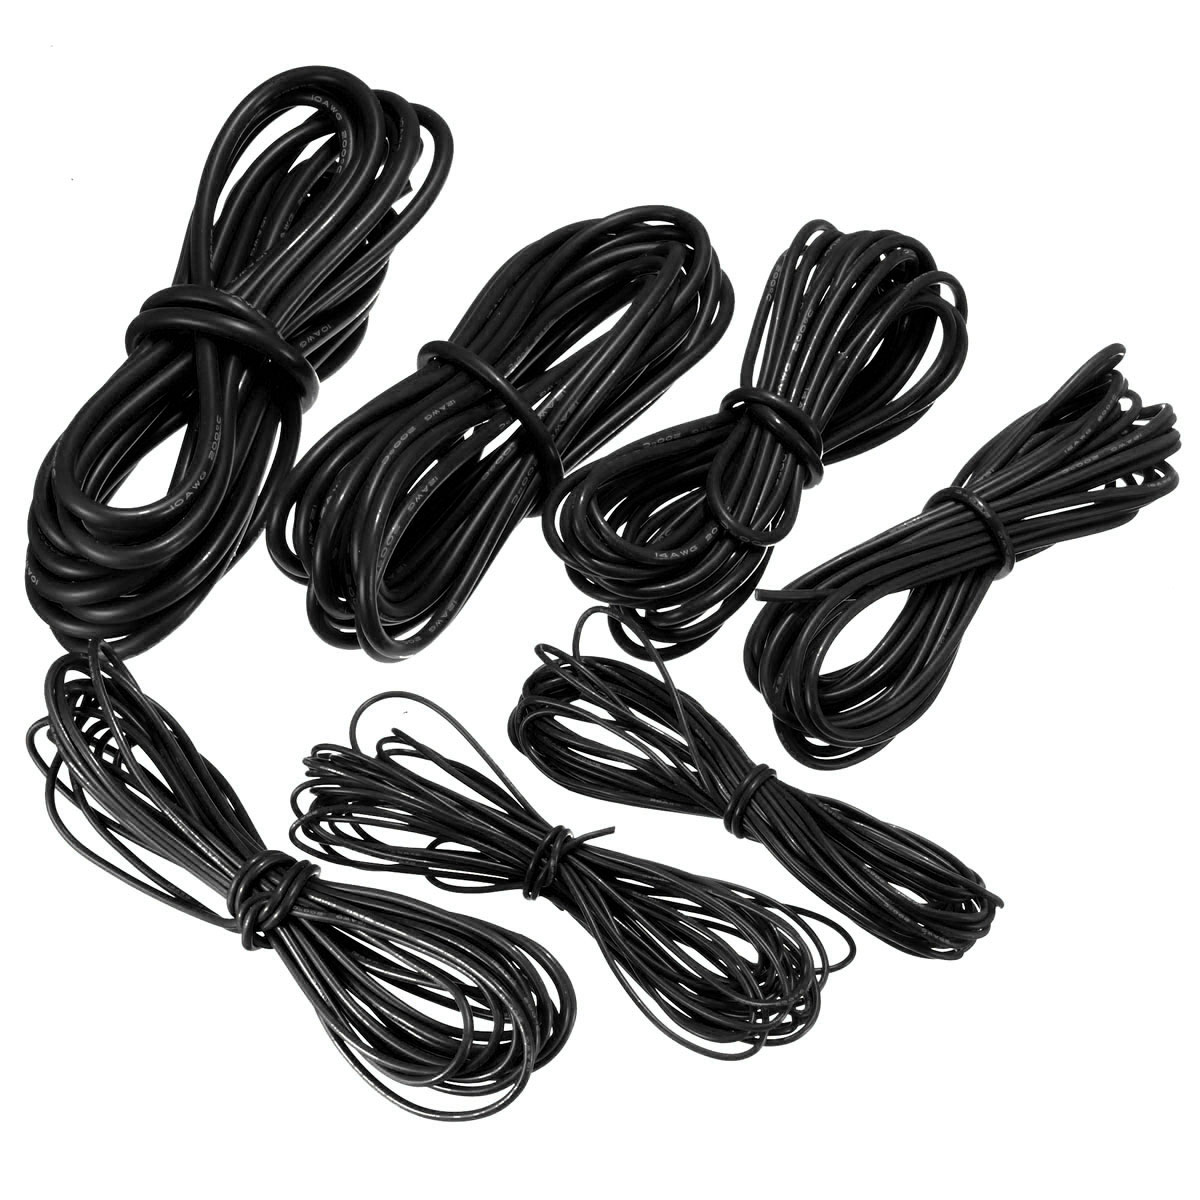 DANIU-5-Meter-Black-Silicone-Wire-Cable-10121416182022AWG-Flexible-Cable-1170293-2